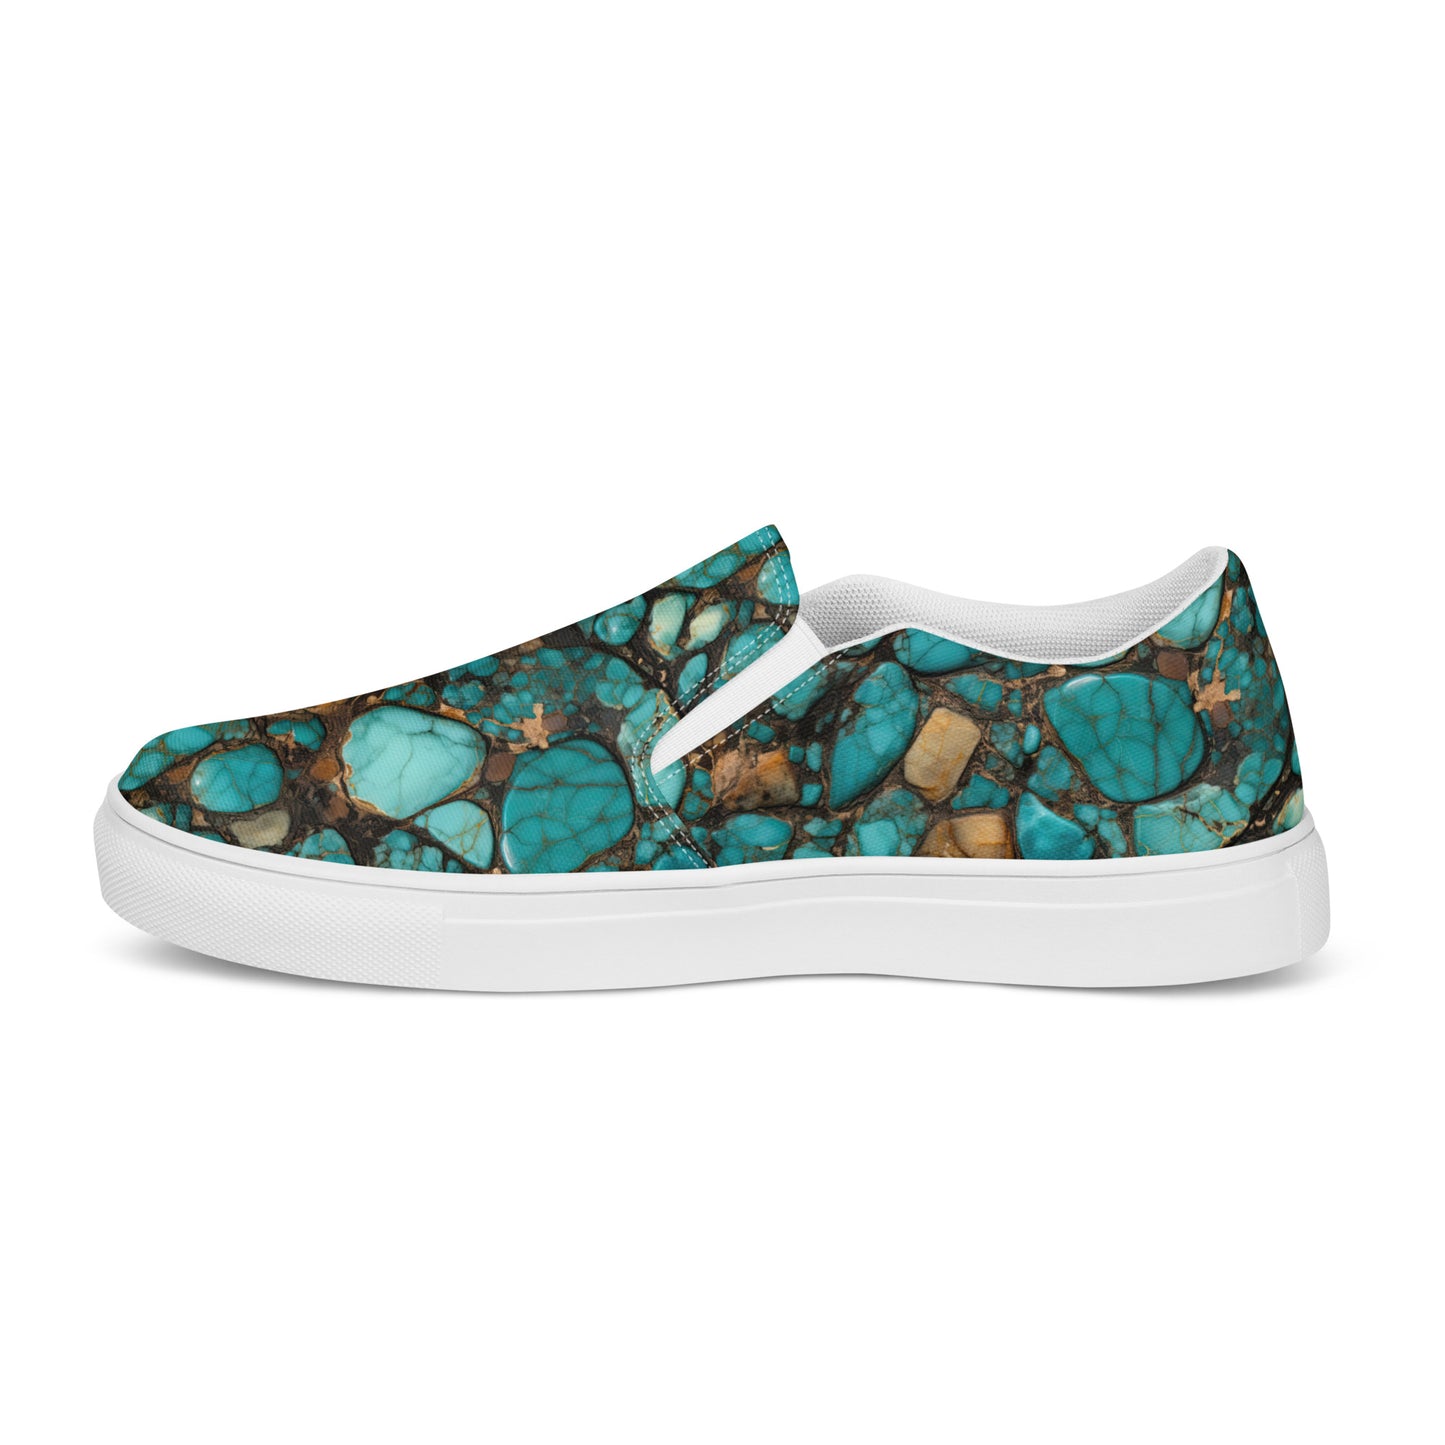 All Turquoise Women’s slip-on canvas shoes